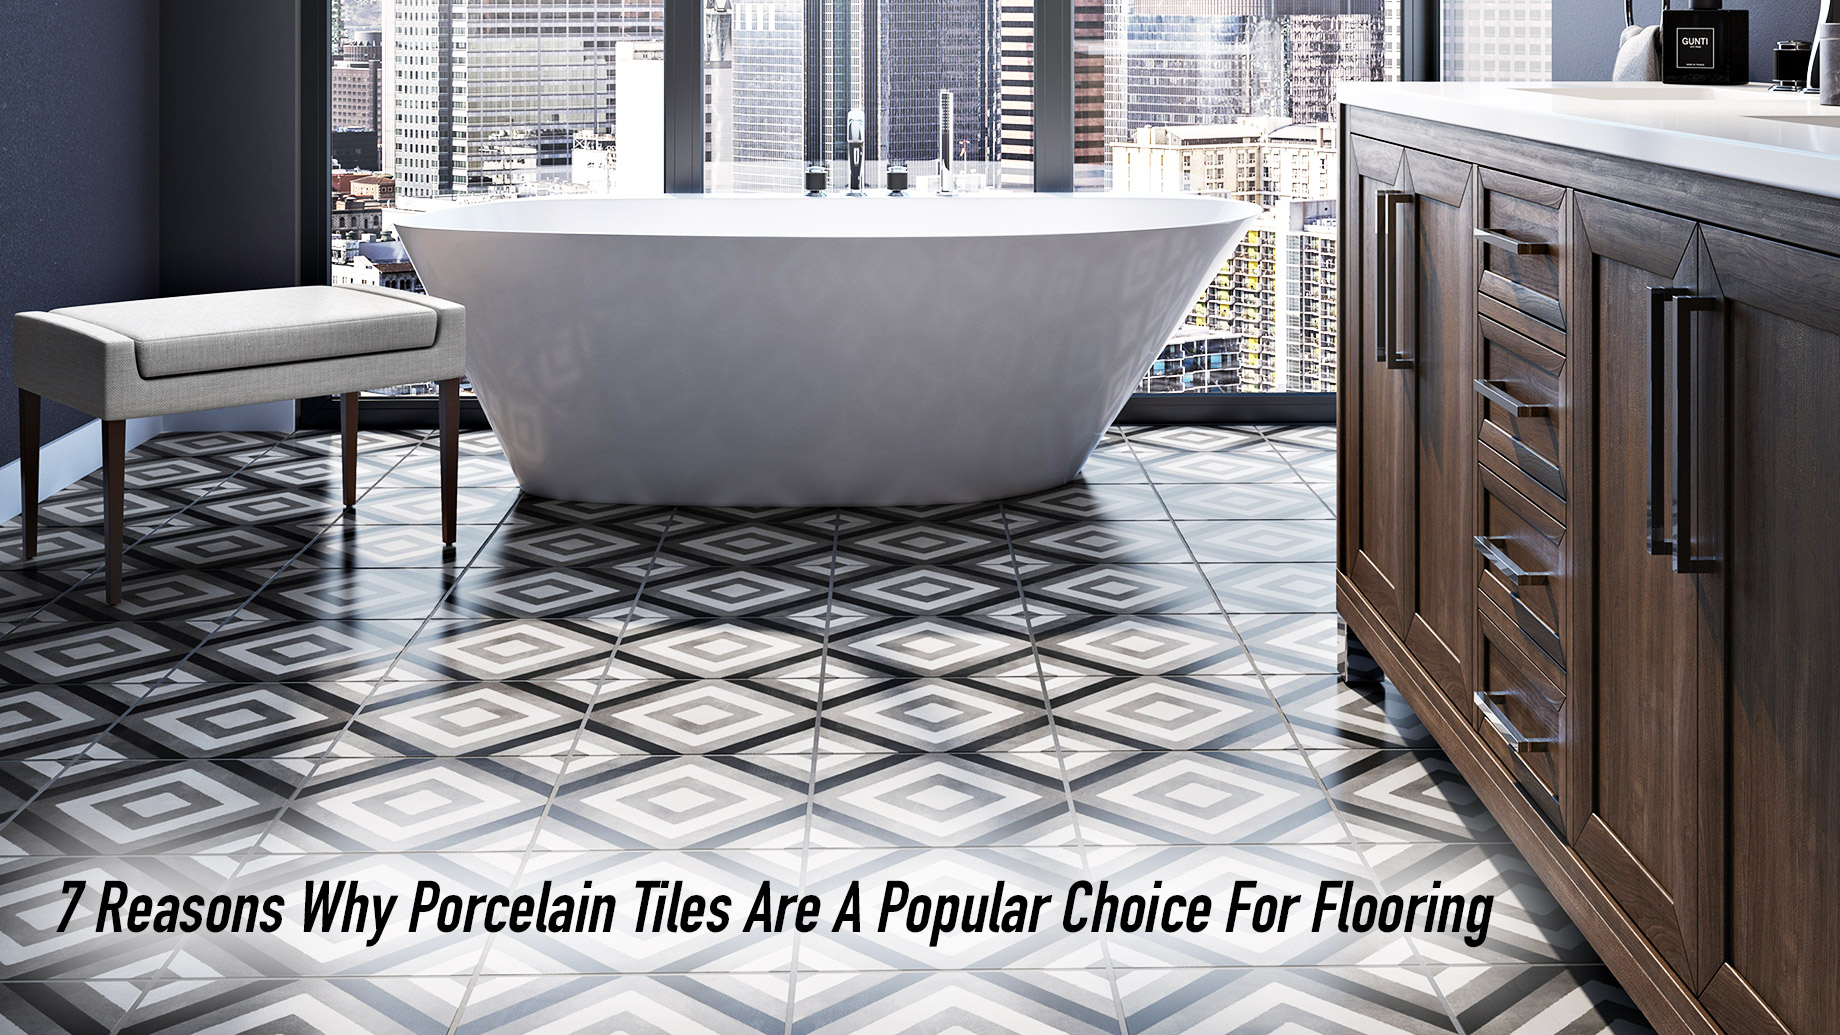 7 Reasons Why Porcelain Tiles Are A Popular Choice For Flooring